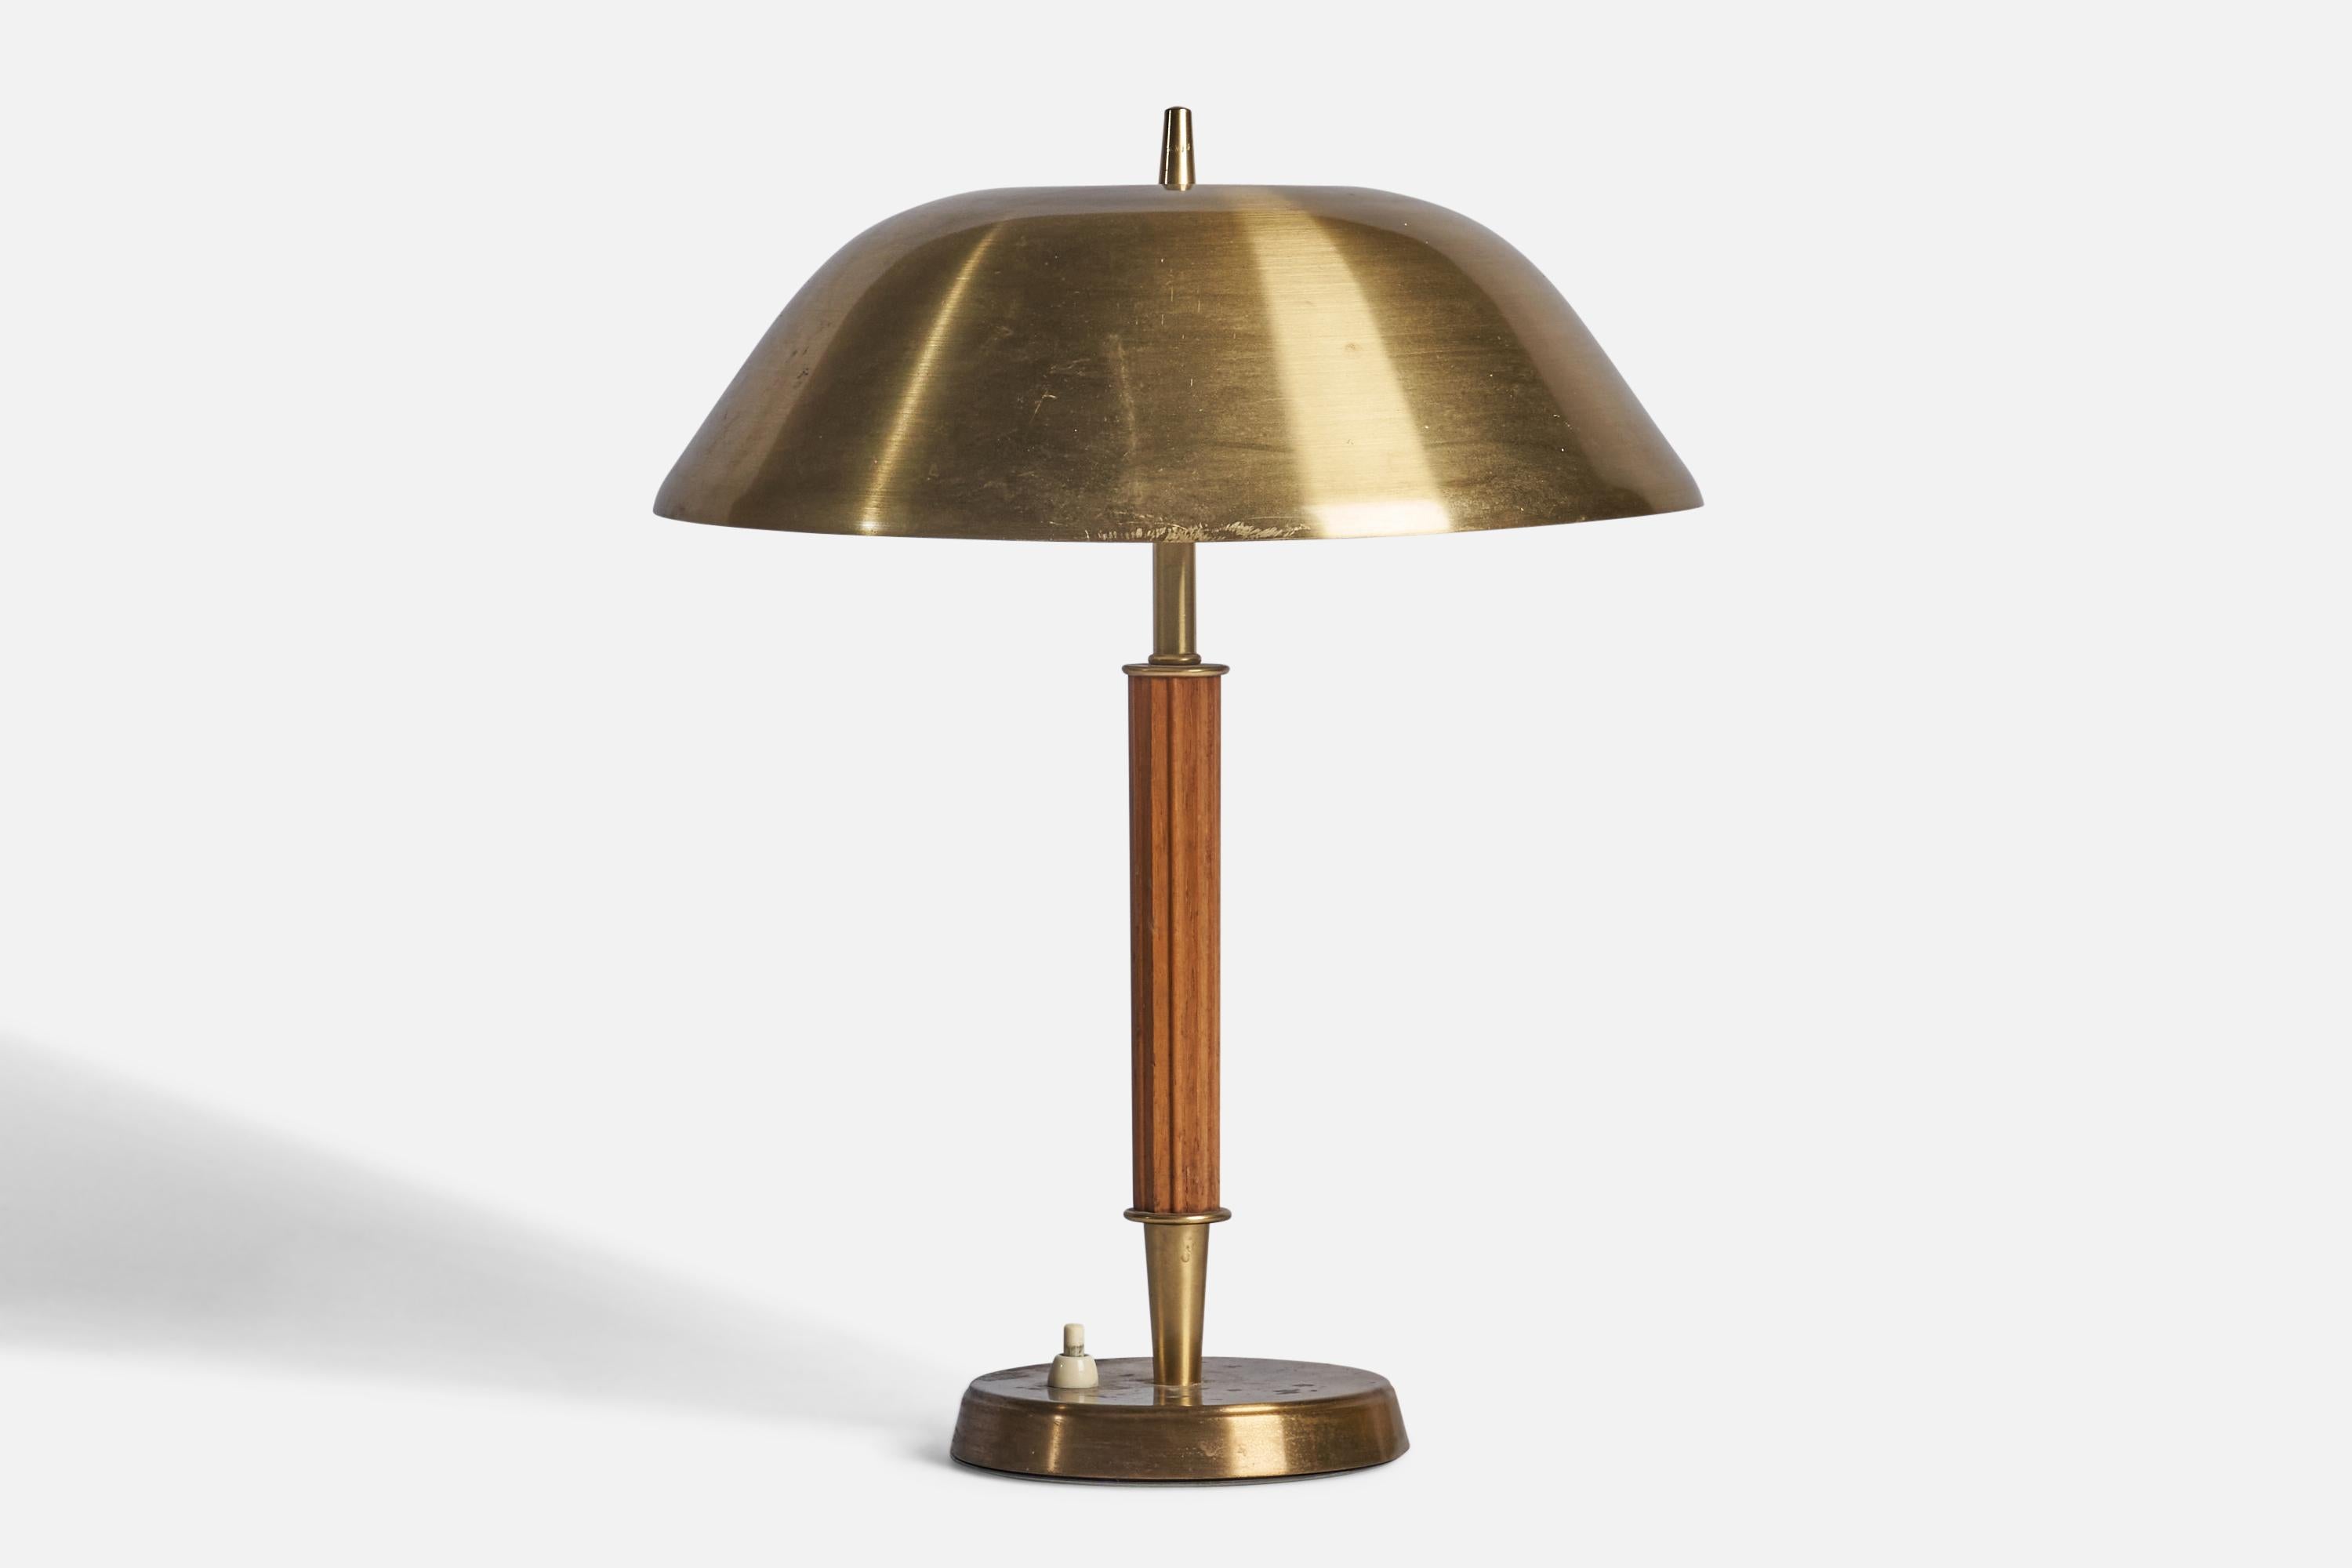 
A brass and oak table lamp designed and produced by Falkenbergs Belysning, Sweden, c. 1940s.
Overall Dimensions (inches): 15.45” H x 12” Diameter
Bulb Specifications: E-26 Bulb
Number of Sockets: 1
All lighting will be converted for US usage. We